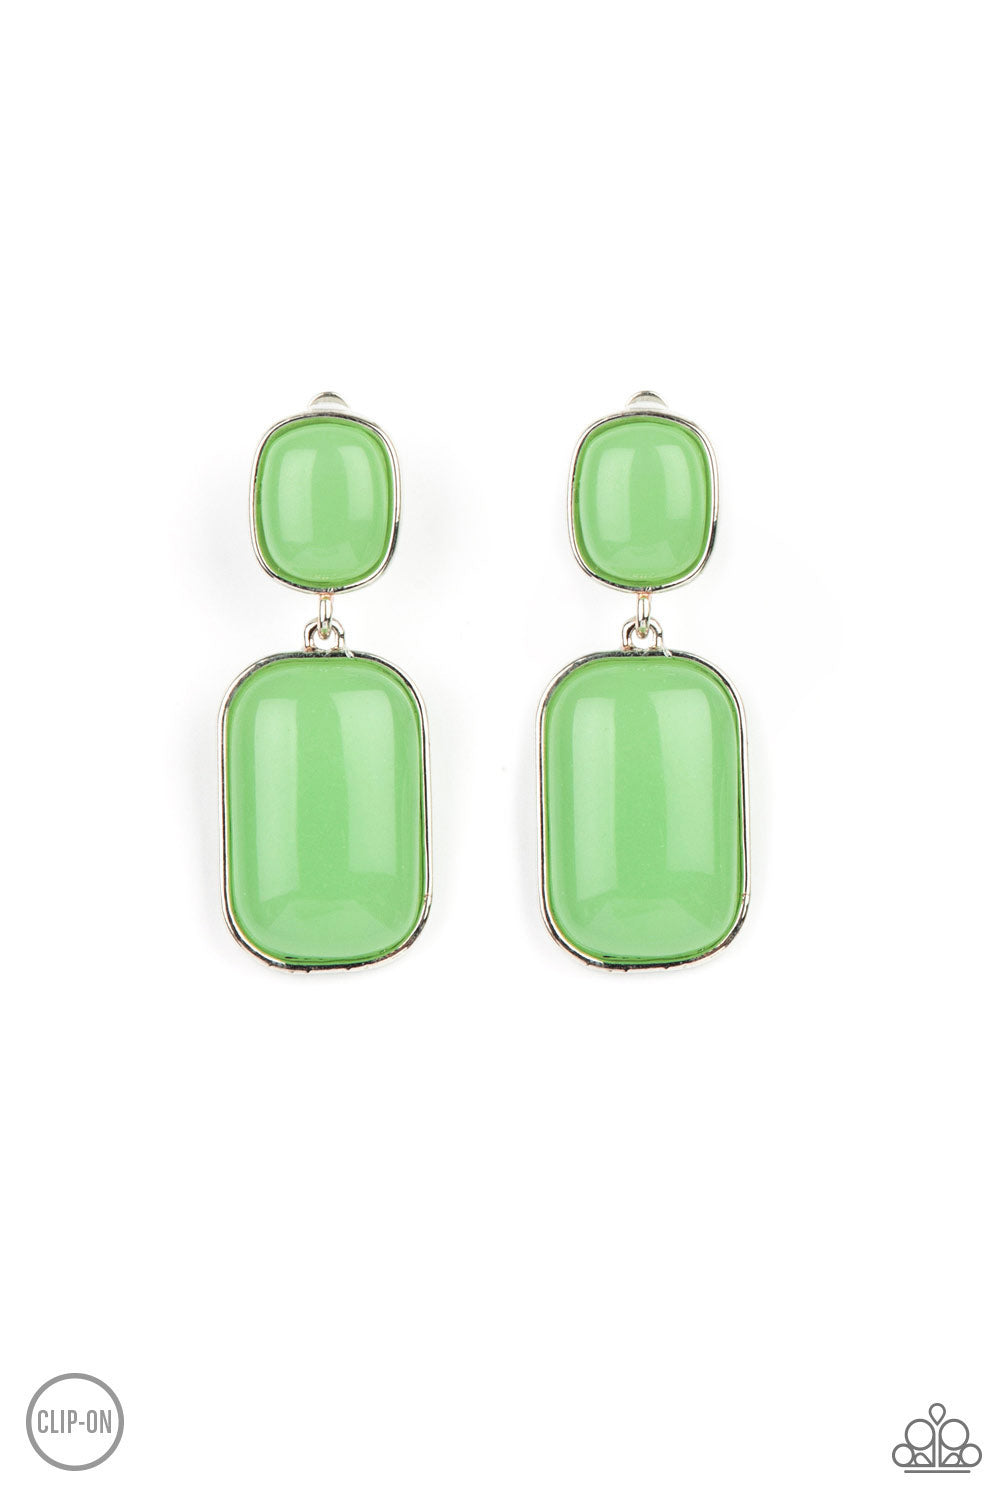 Meet Me At The Plaza - Green Earrings